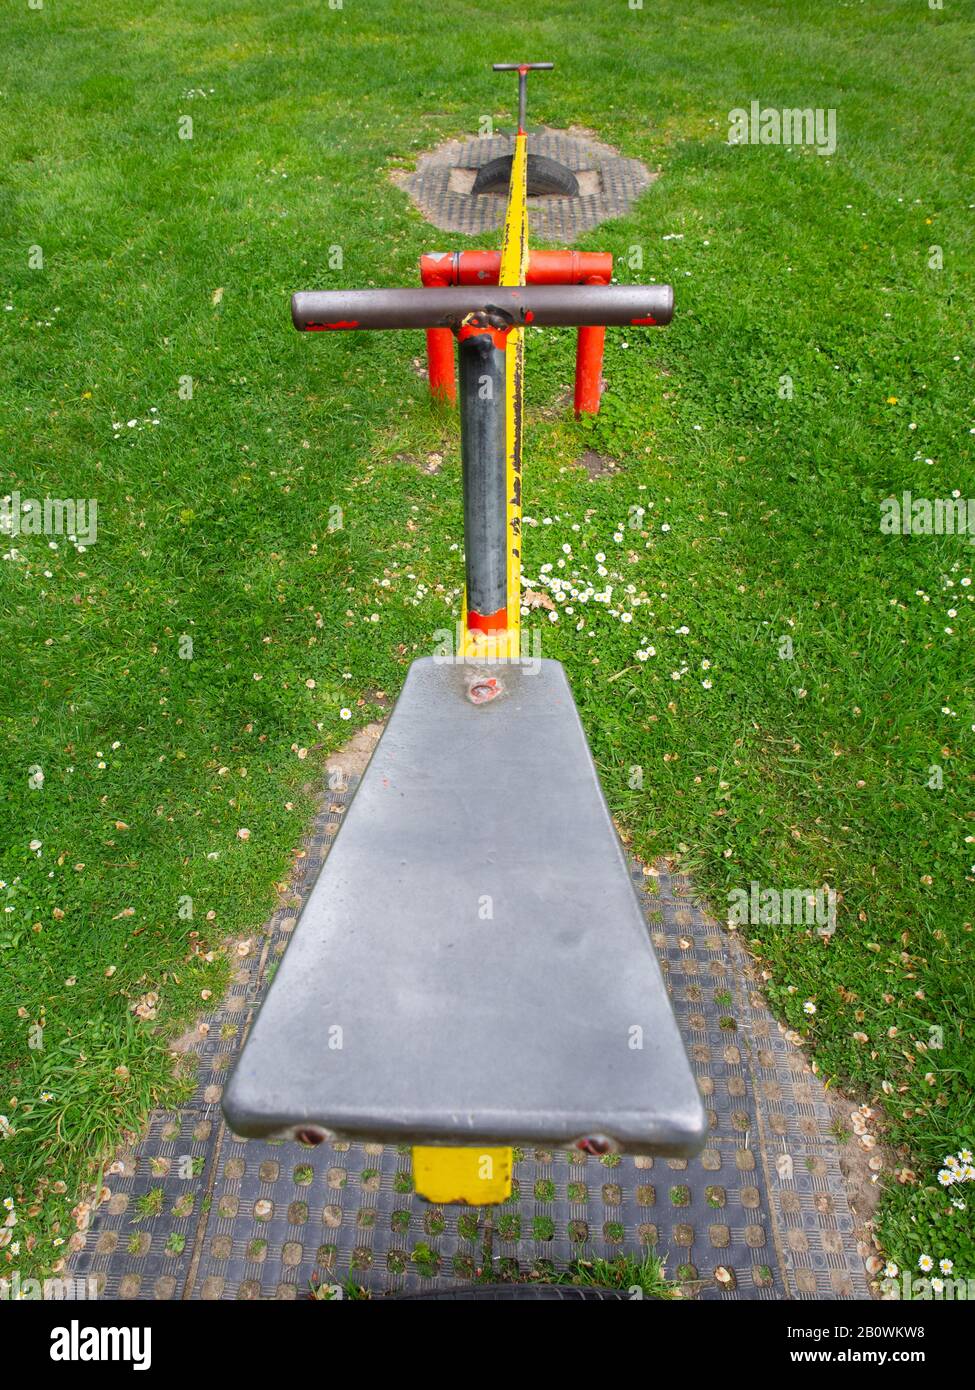 Seesaw In A Childrens Playground Stock Photo